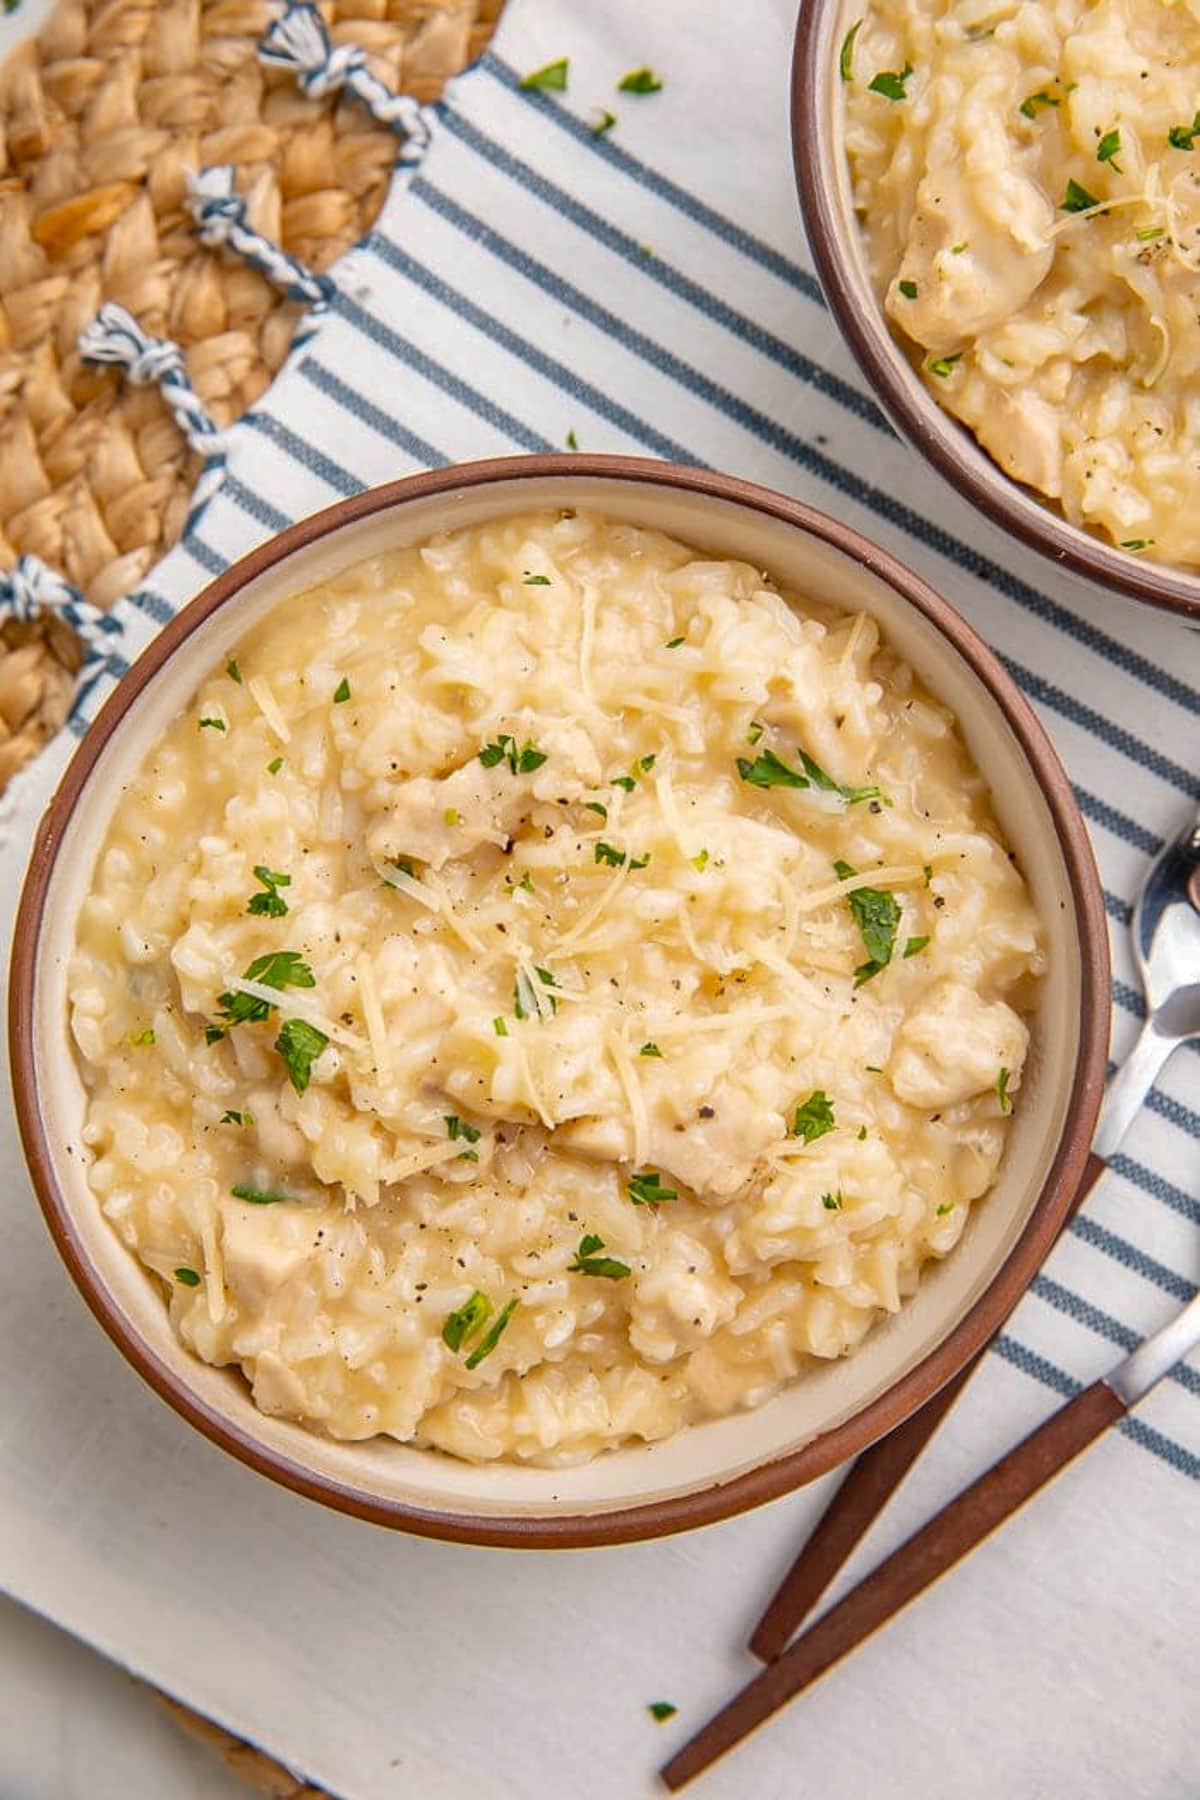 Two bowls of creamy chicken and rice cooked in an instant Pot on a table with a blue and white striped cloth napkin.